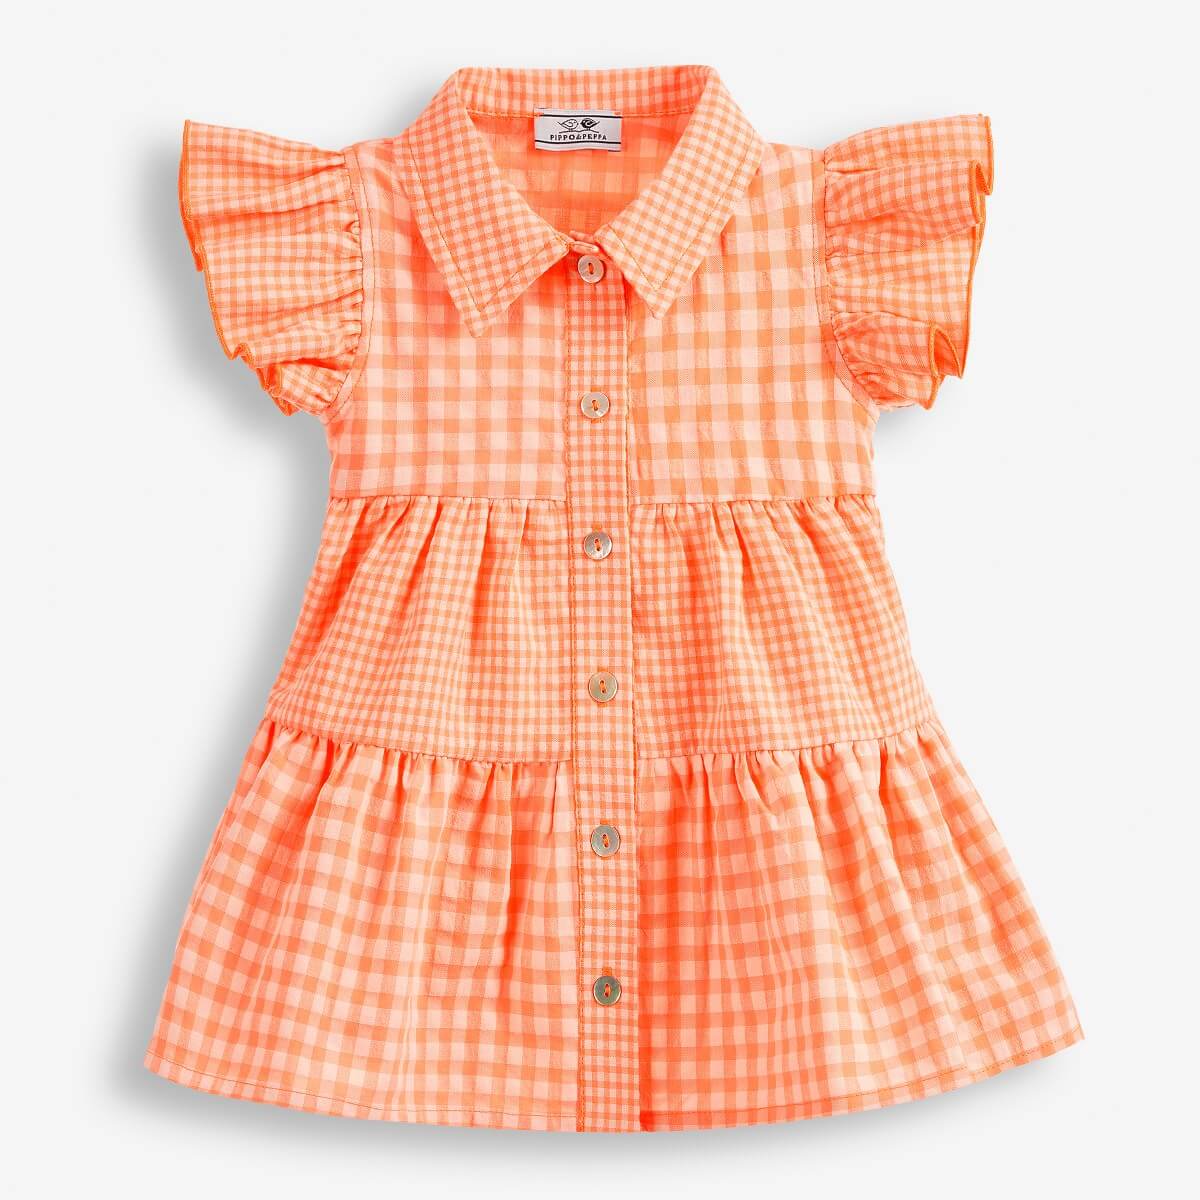 Baby Girls' Checkered Dress with Ruffles on the Shoulders